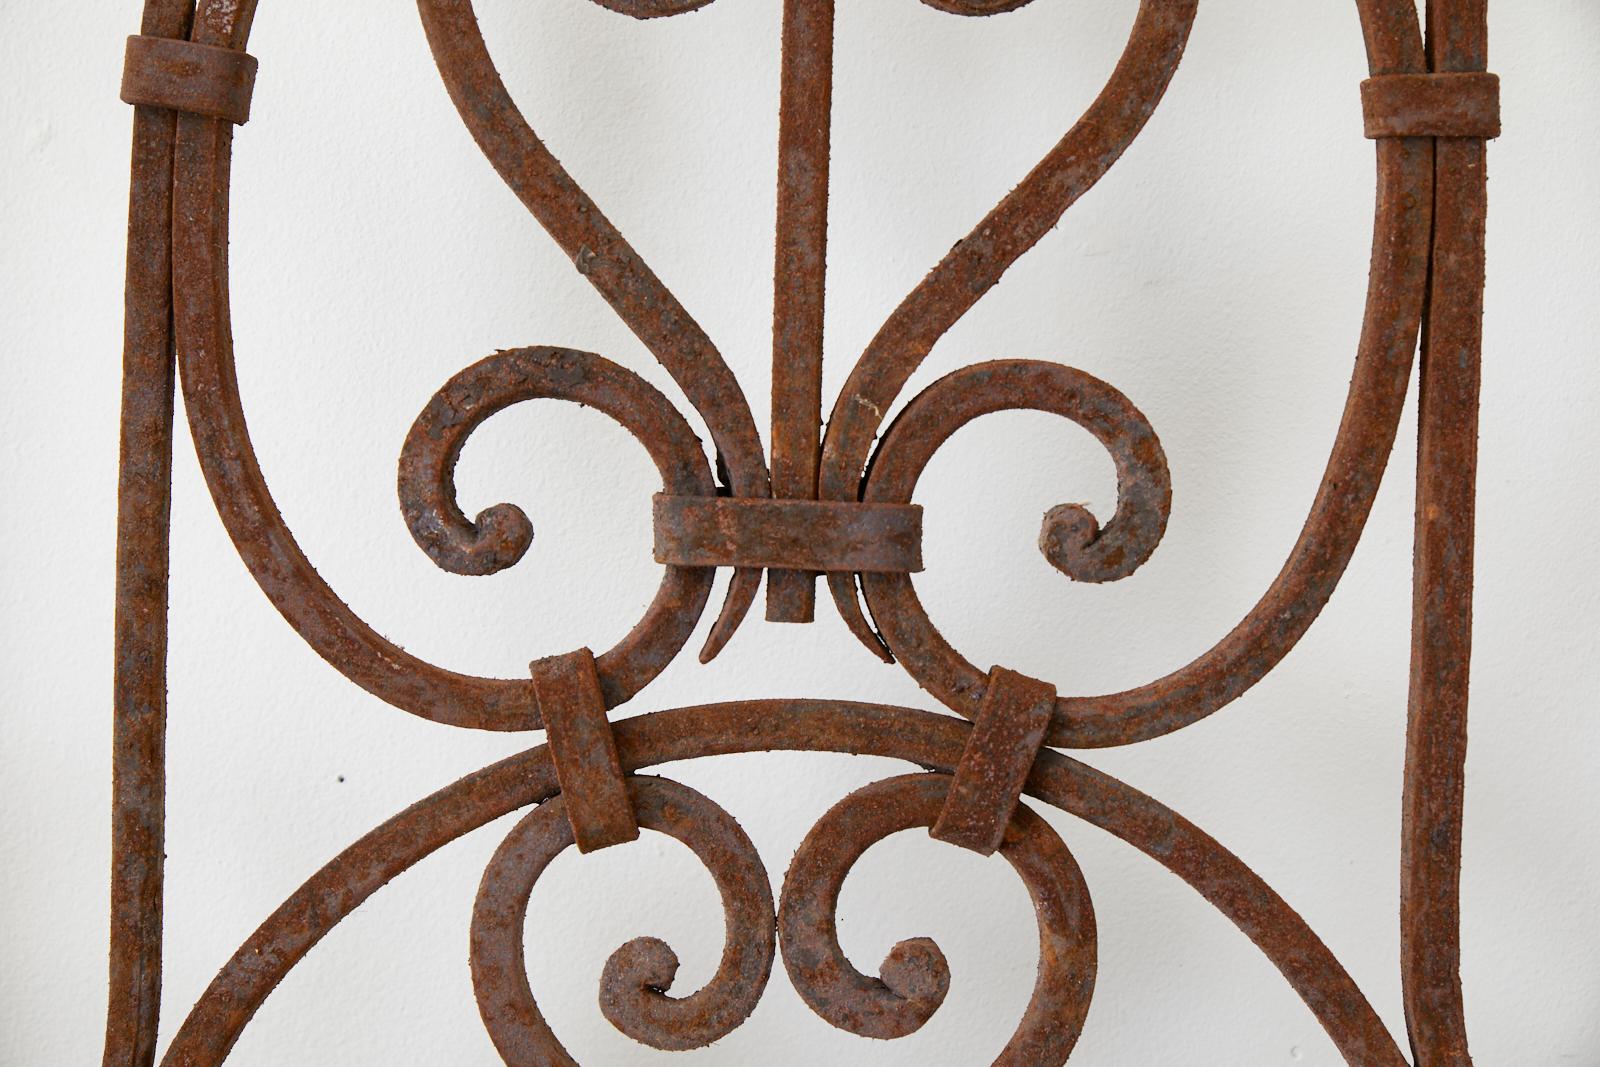 Hand-Crafted Set of Eight Spanish Wrought Iron Doors or Gates